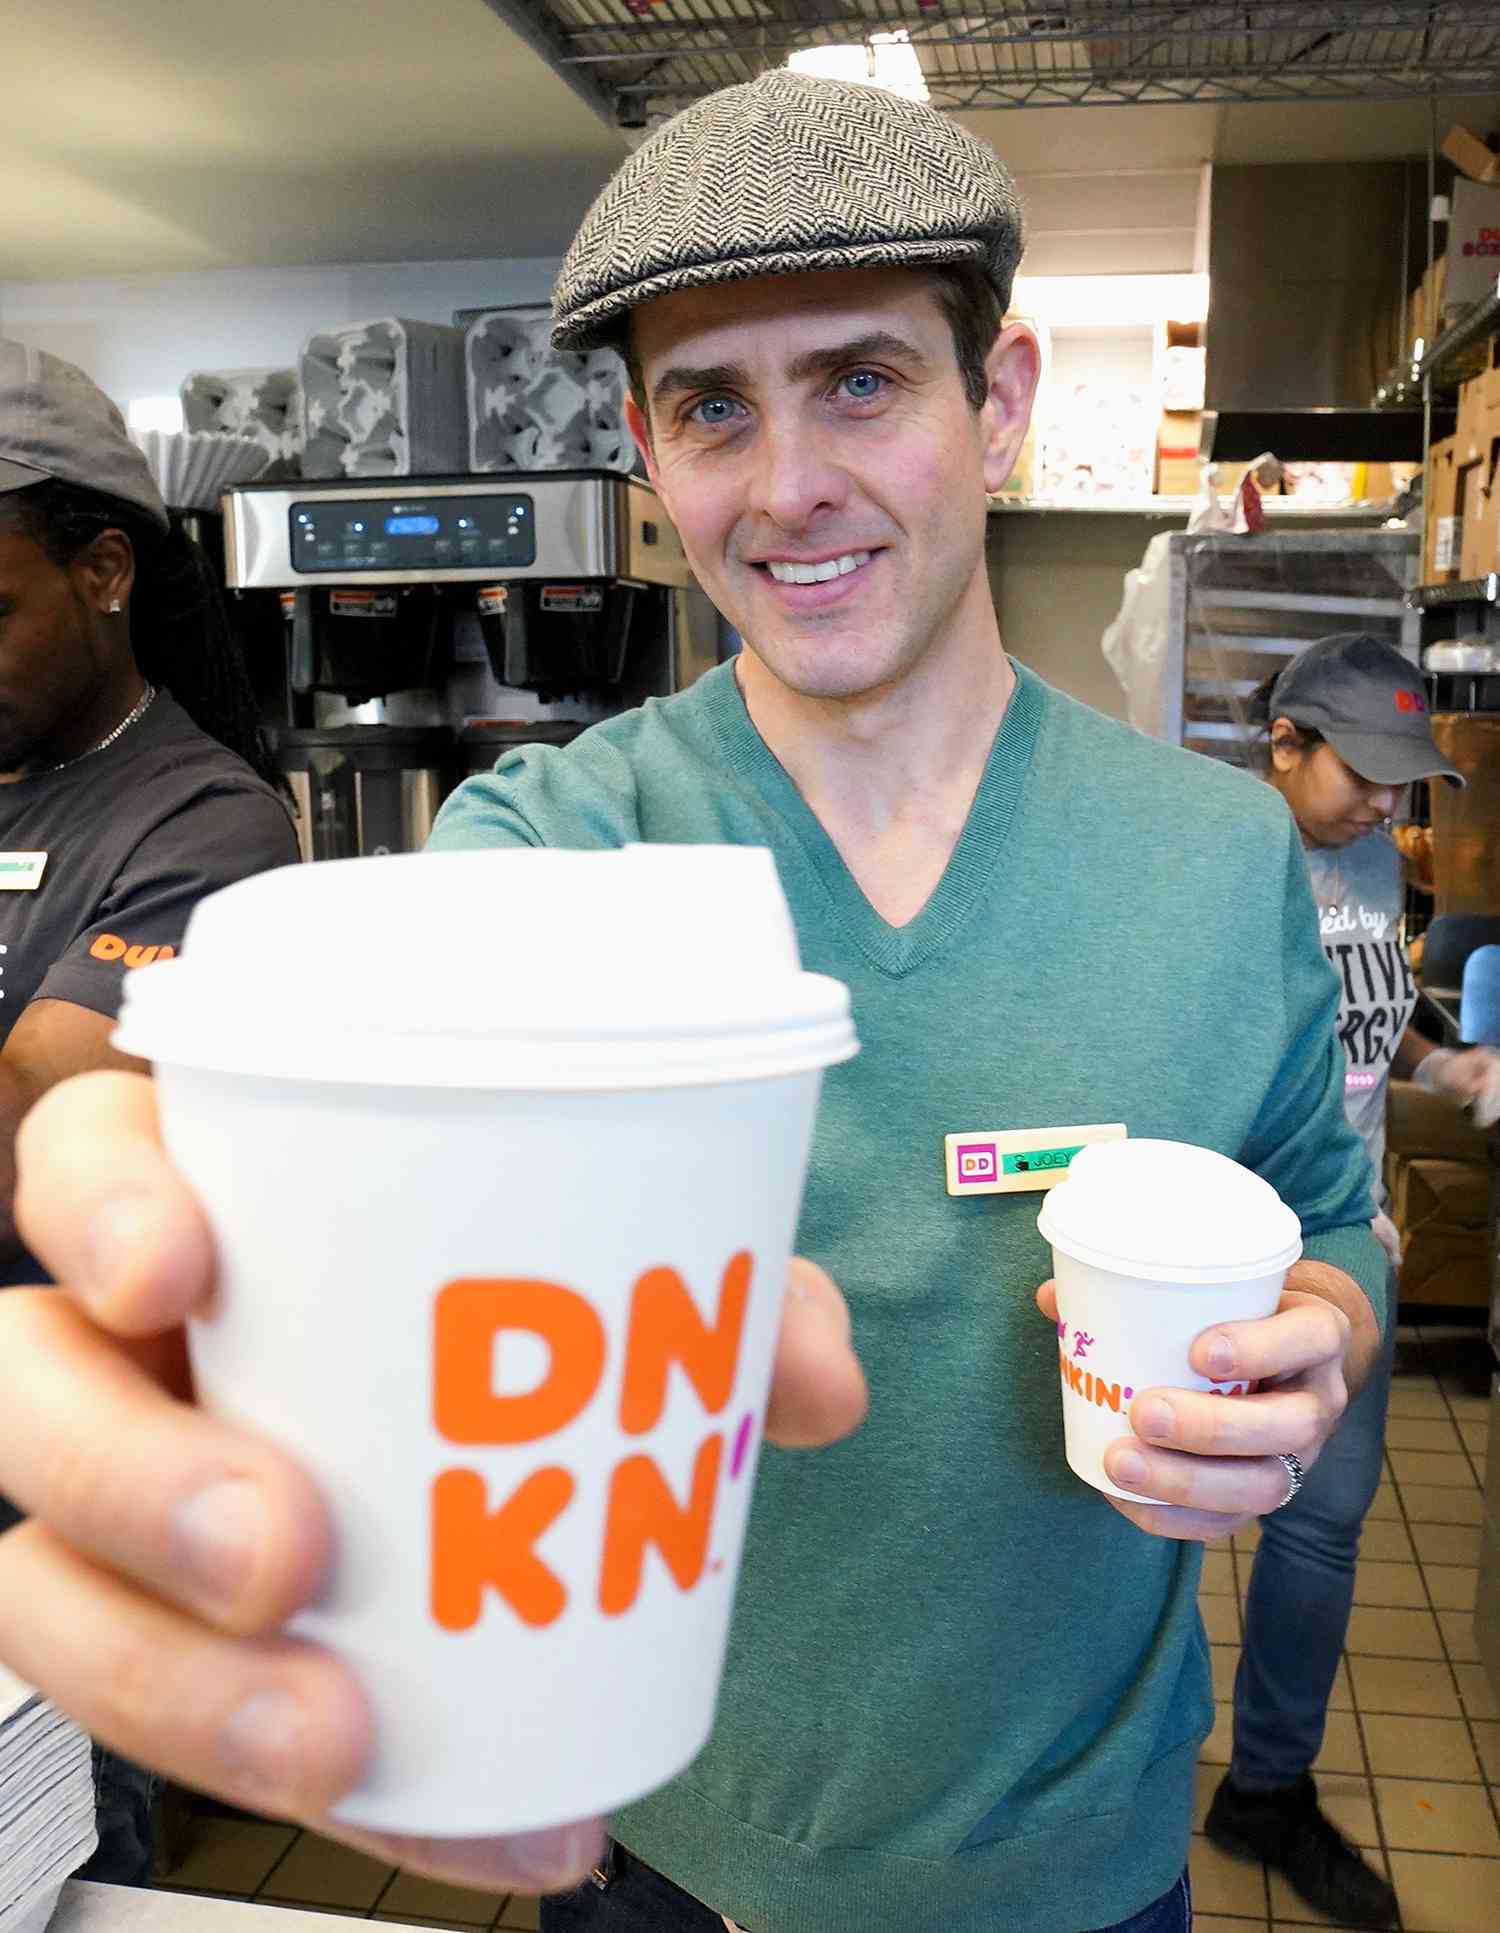 Dunkin' Rebrands To O'Dunkin' And Celebrates With Joey McIntyre Serving Free Irish Creme Coffee And Lattes To Guests In NYC